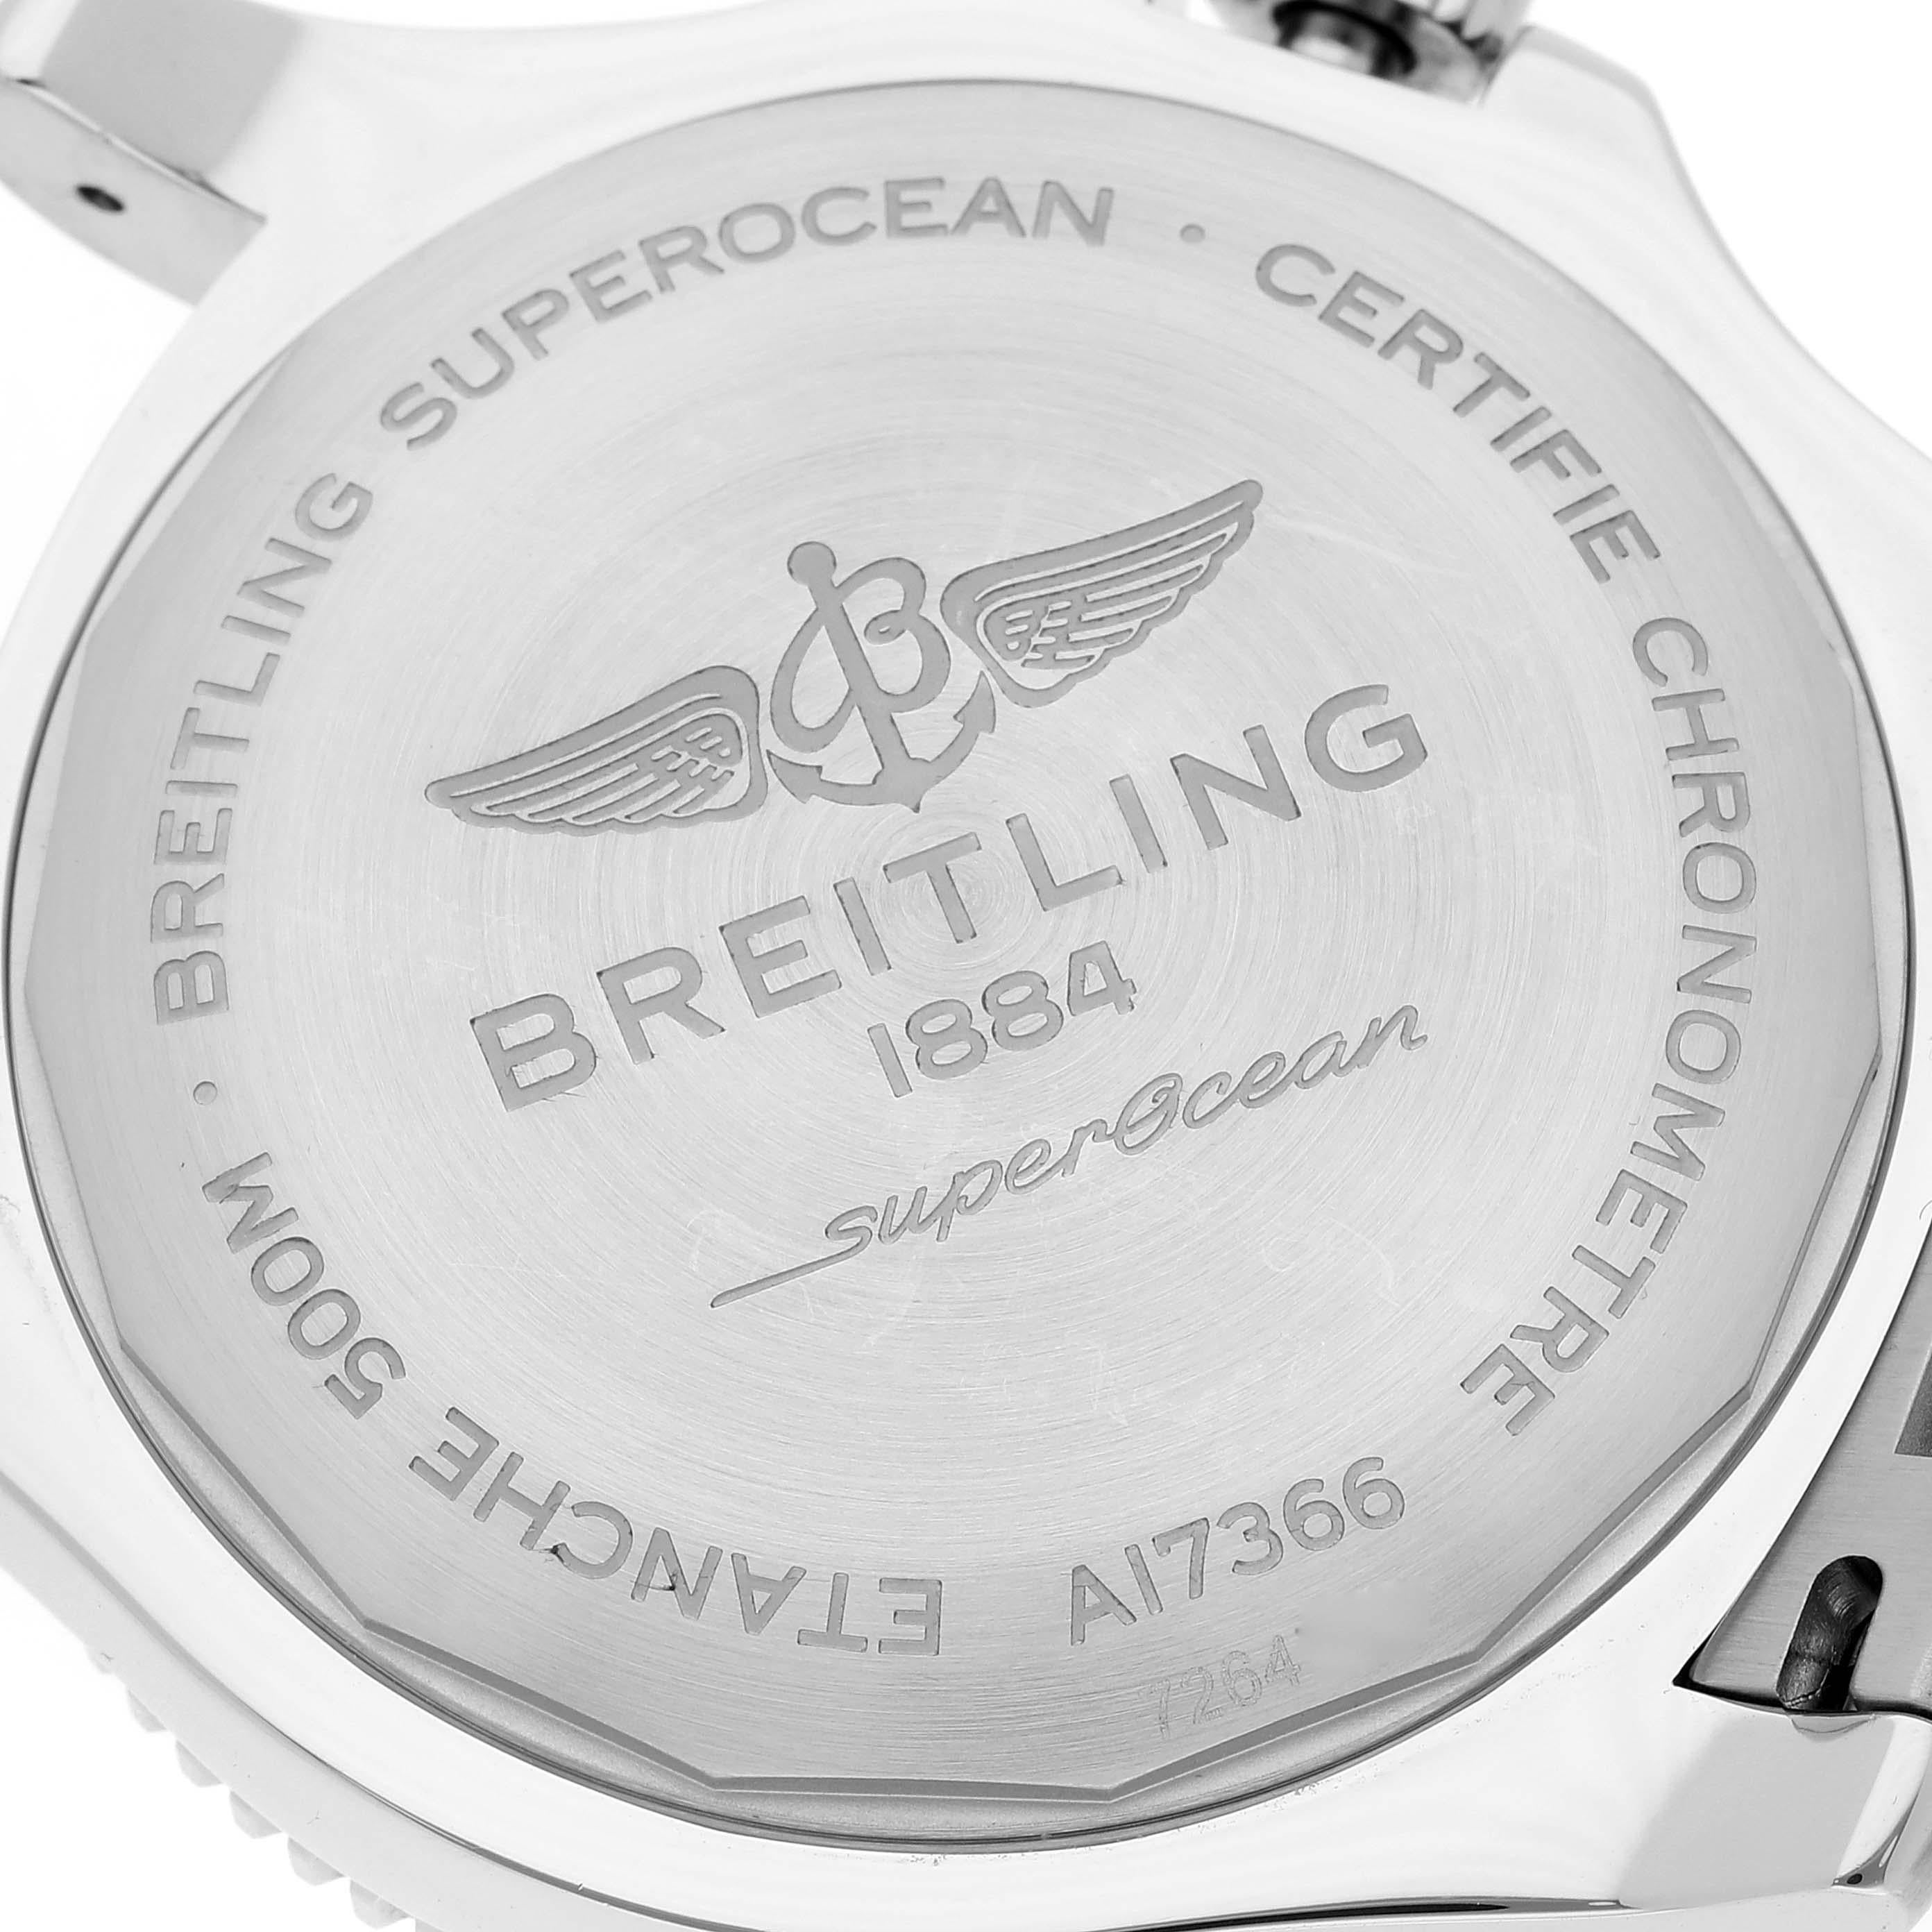 Breitling Superocean 42 Orange Dial Steel Mens Watch A17366 Box Card For Sale 2